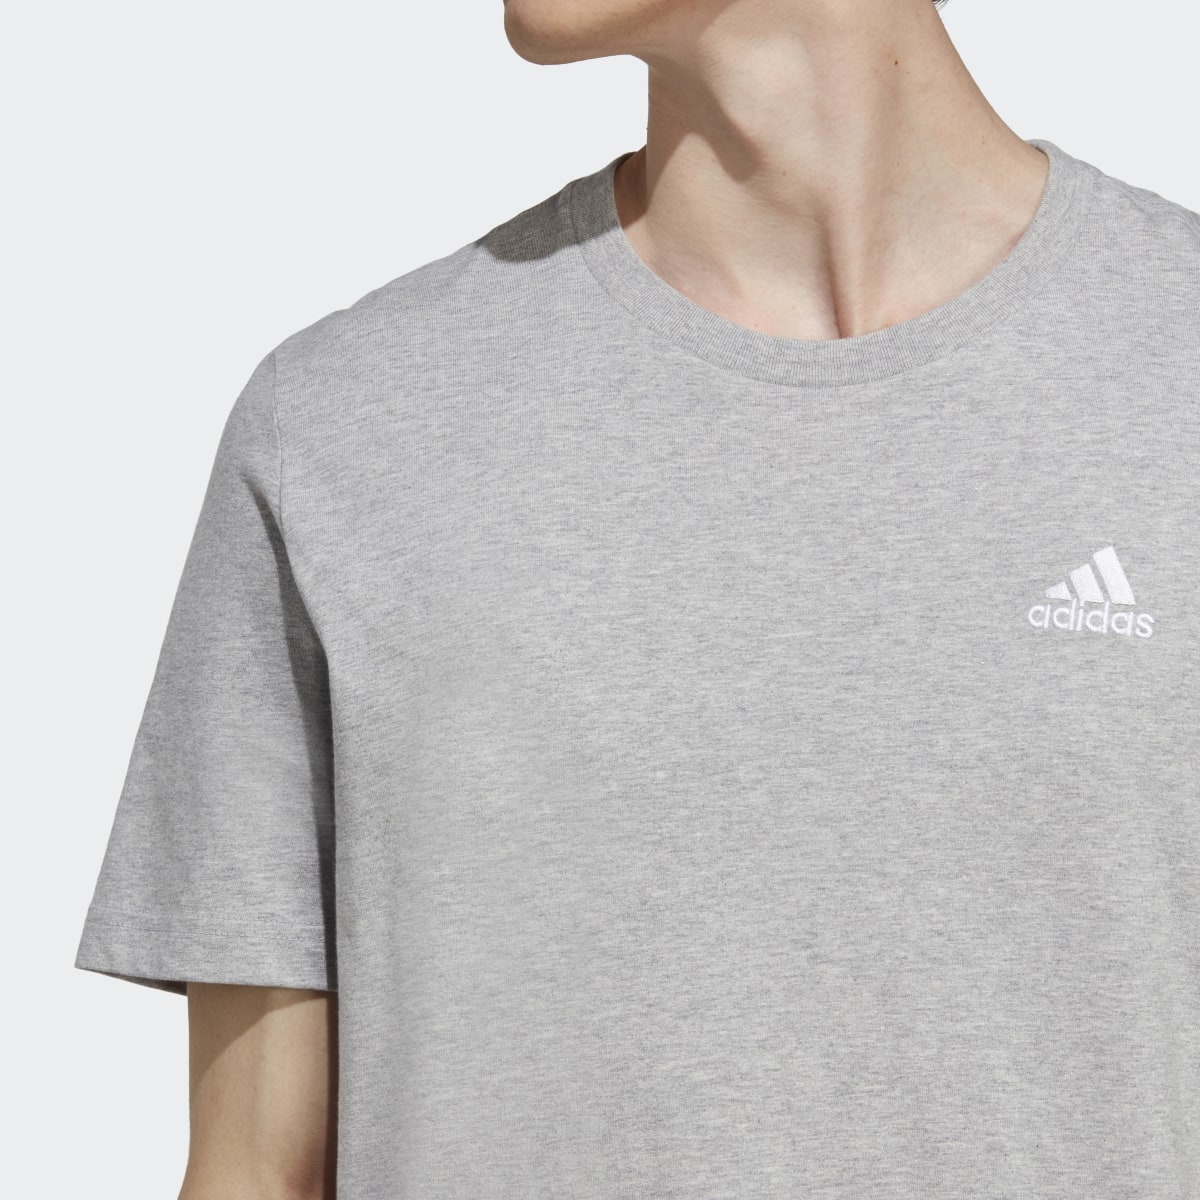 Adidas Essentials Single Jersey Embroidered Small Logo T-Shirt. 6